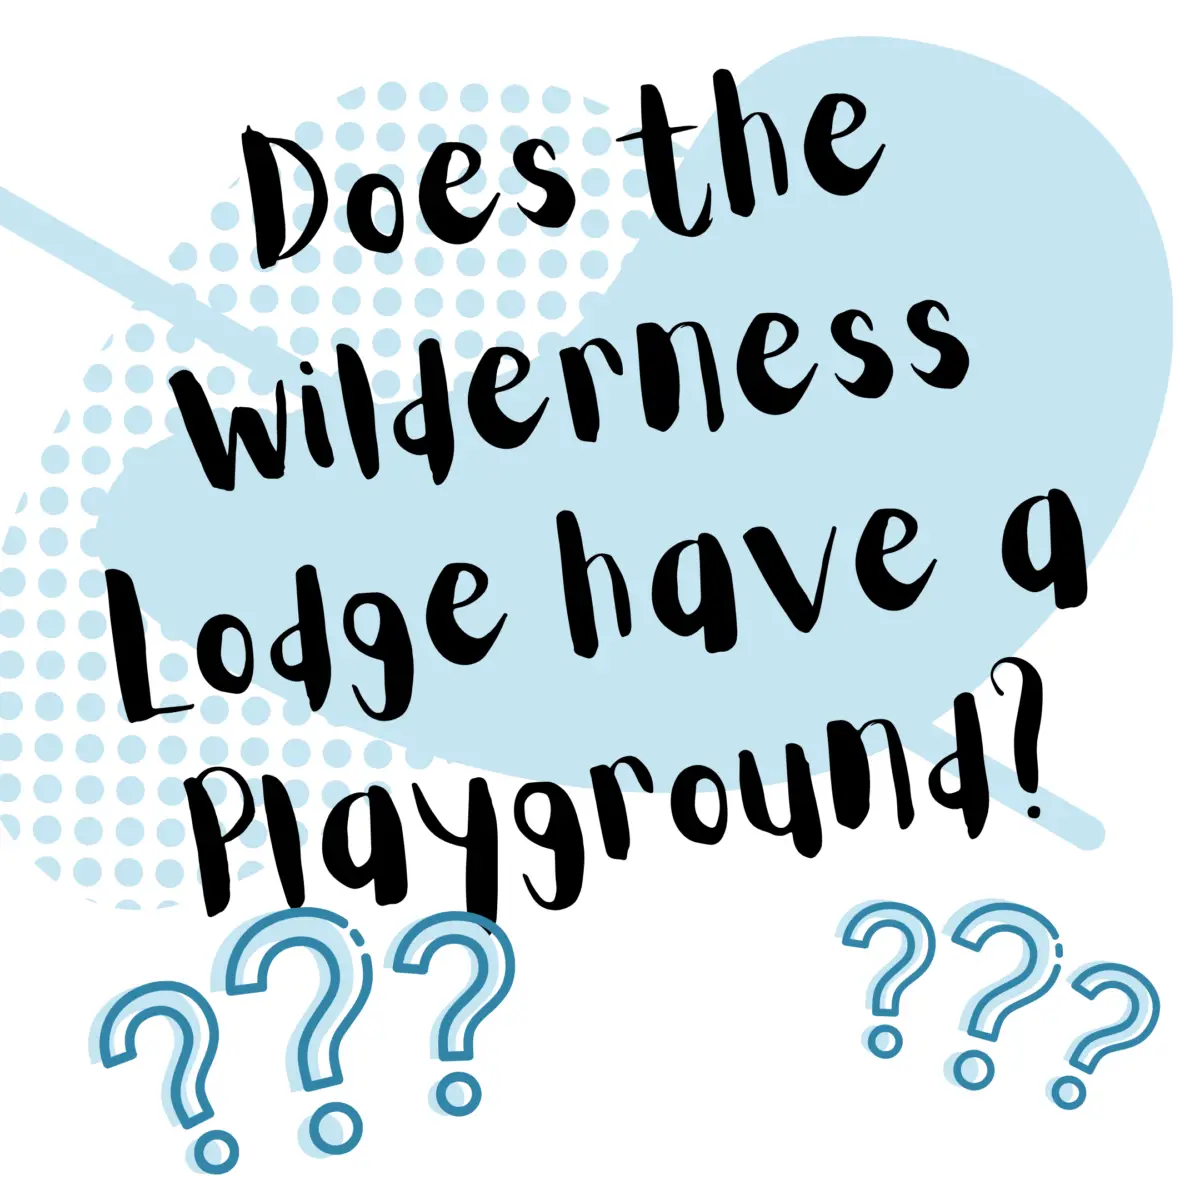 Does Disney's Wilderness Lodge Resort have a playground? 2021